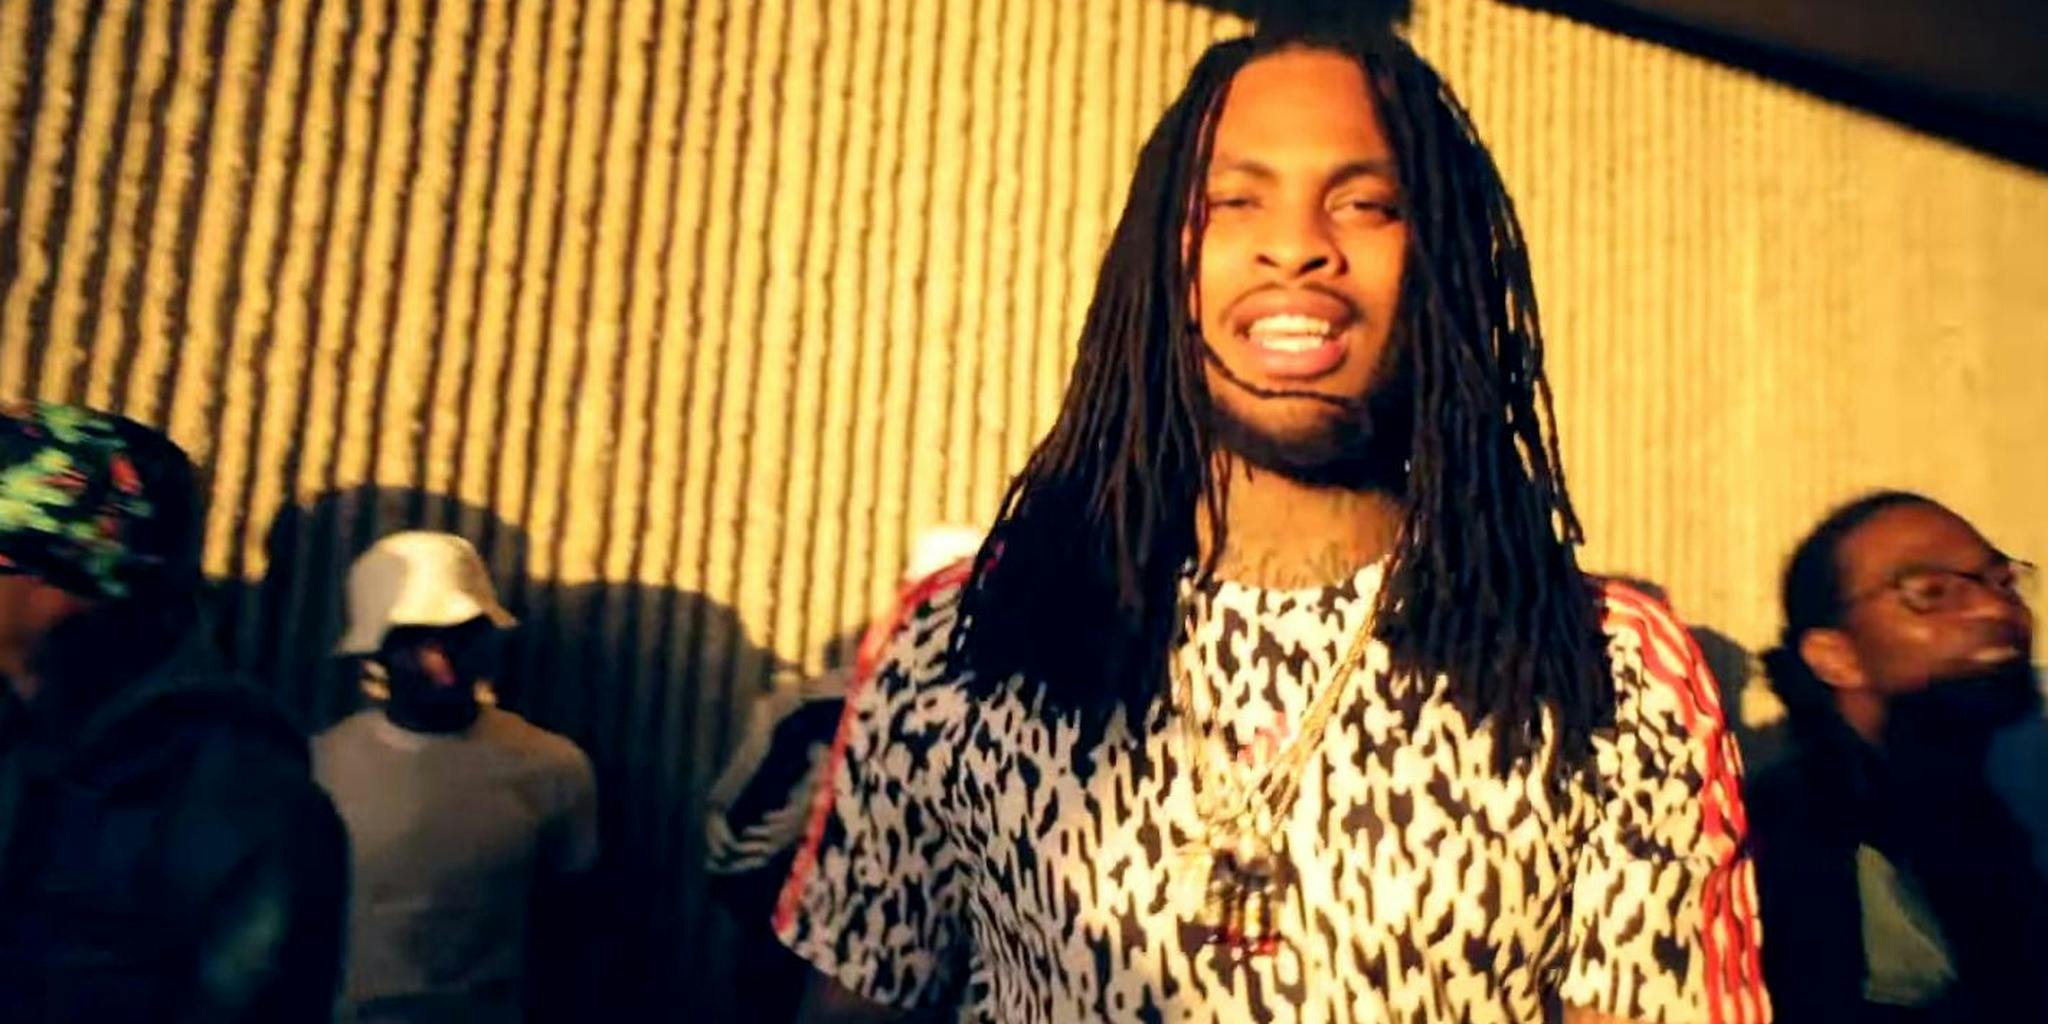 Waka Flocka Flame will pay you $50K to roll his blunts - The Daily Dot